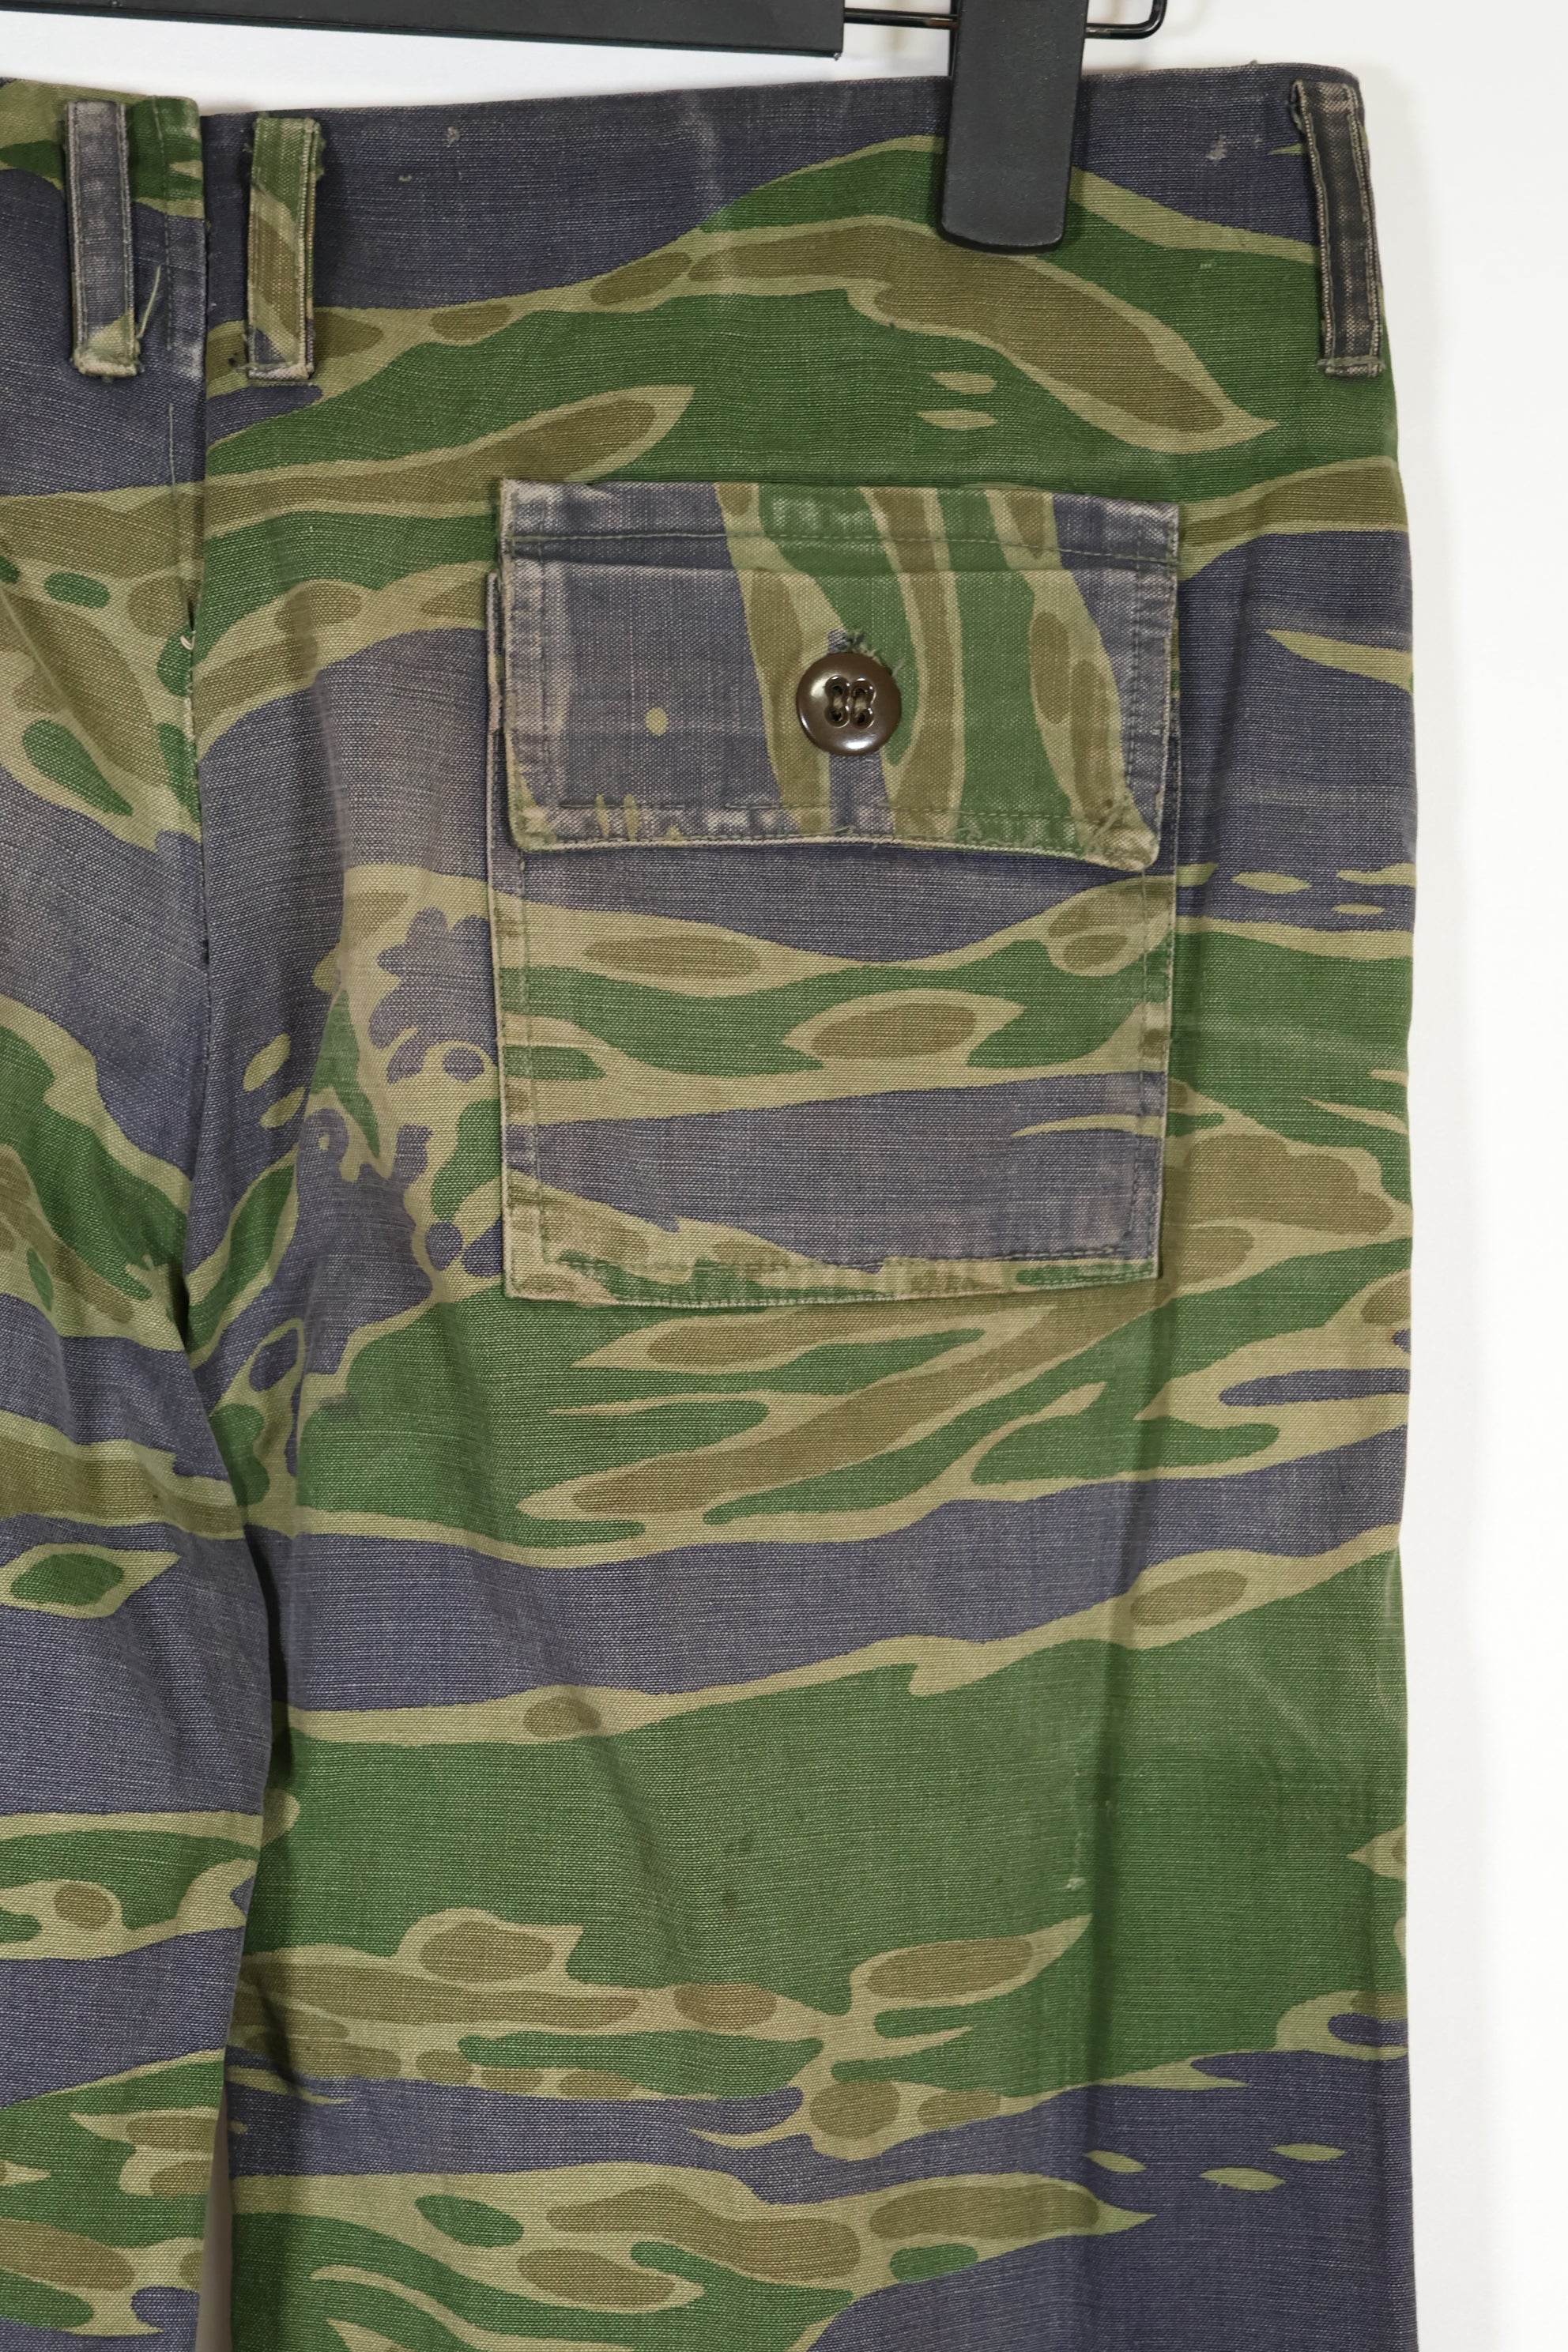 Real 1970s Late War Tiger Stripe Pants, used.